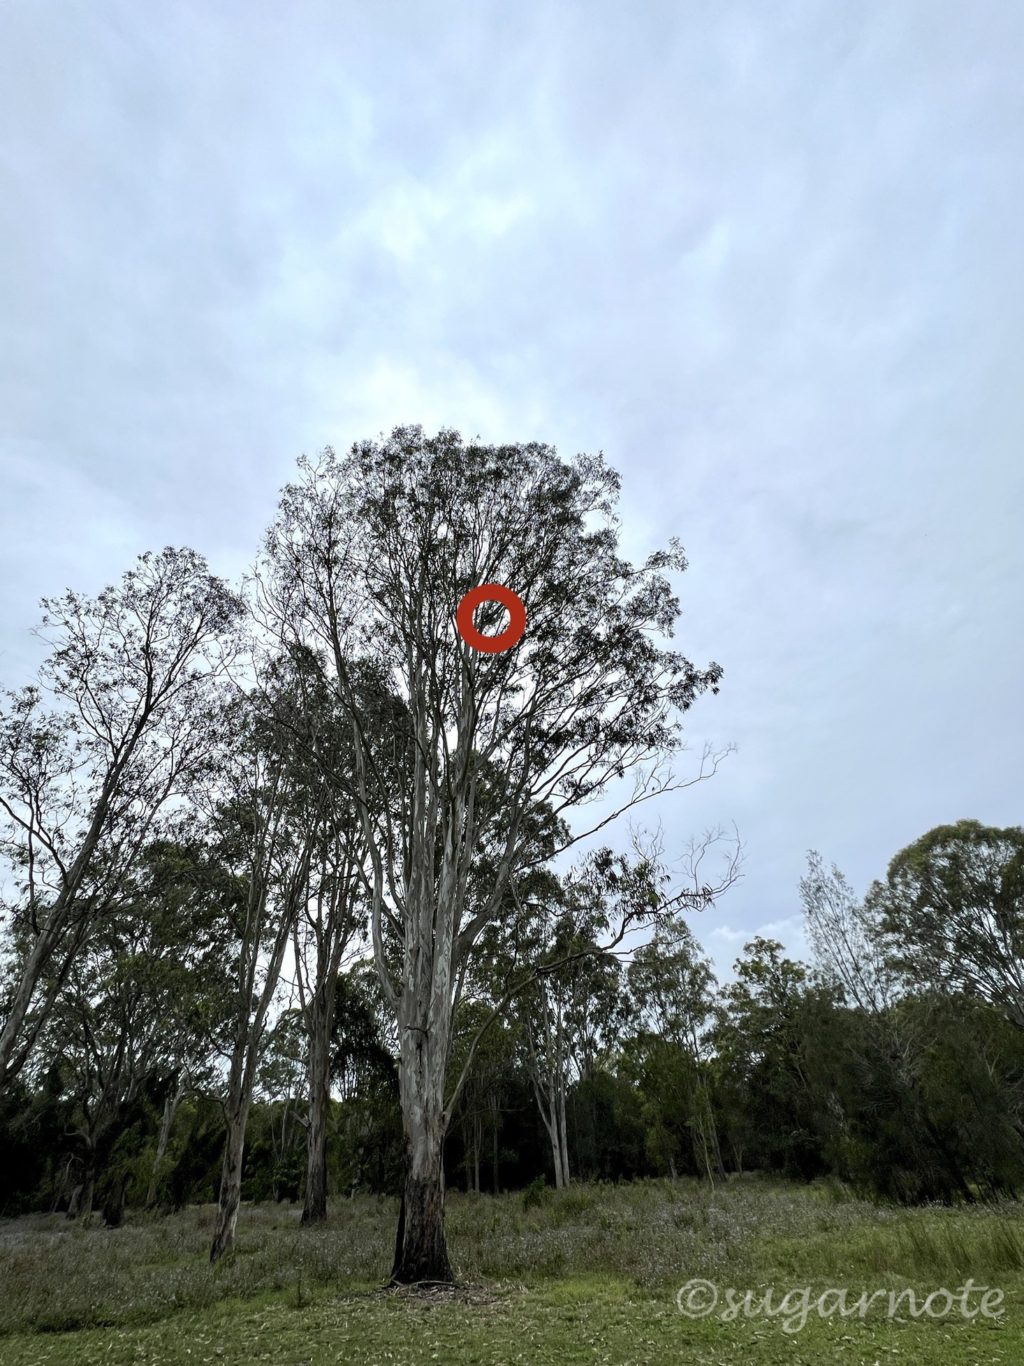 Koala on a tree with red circle